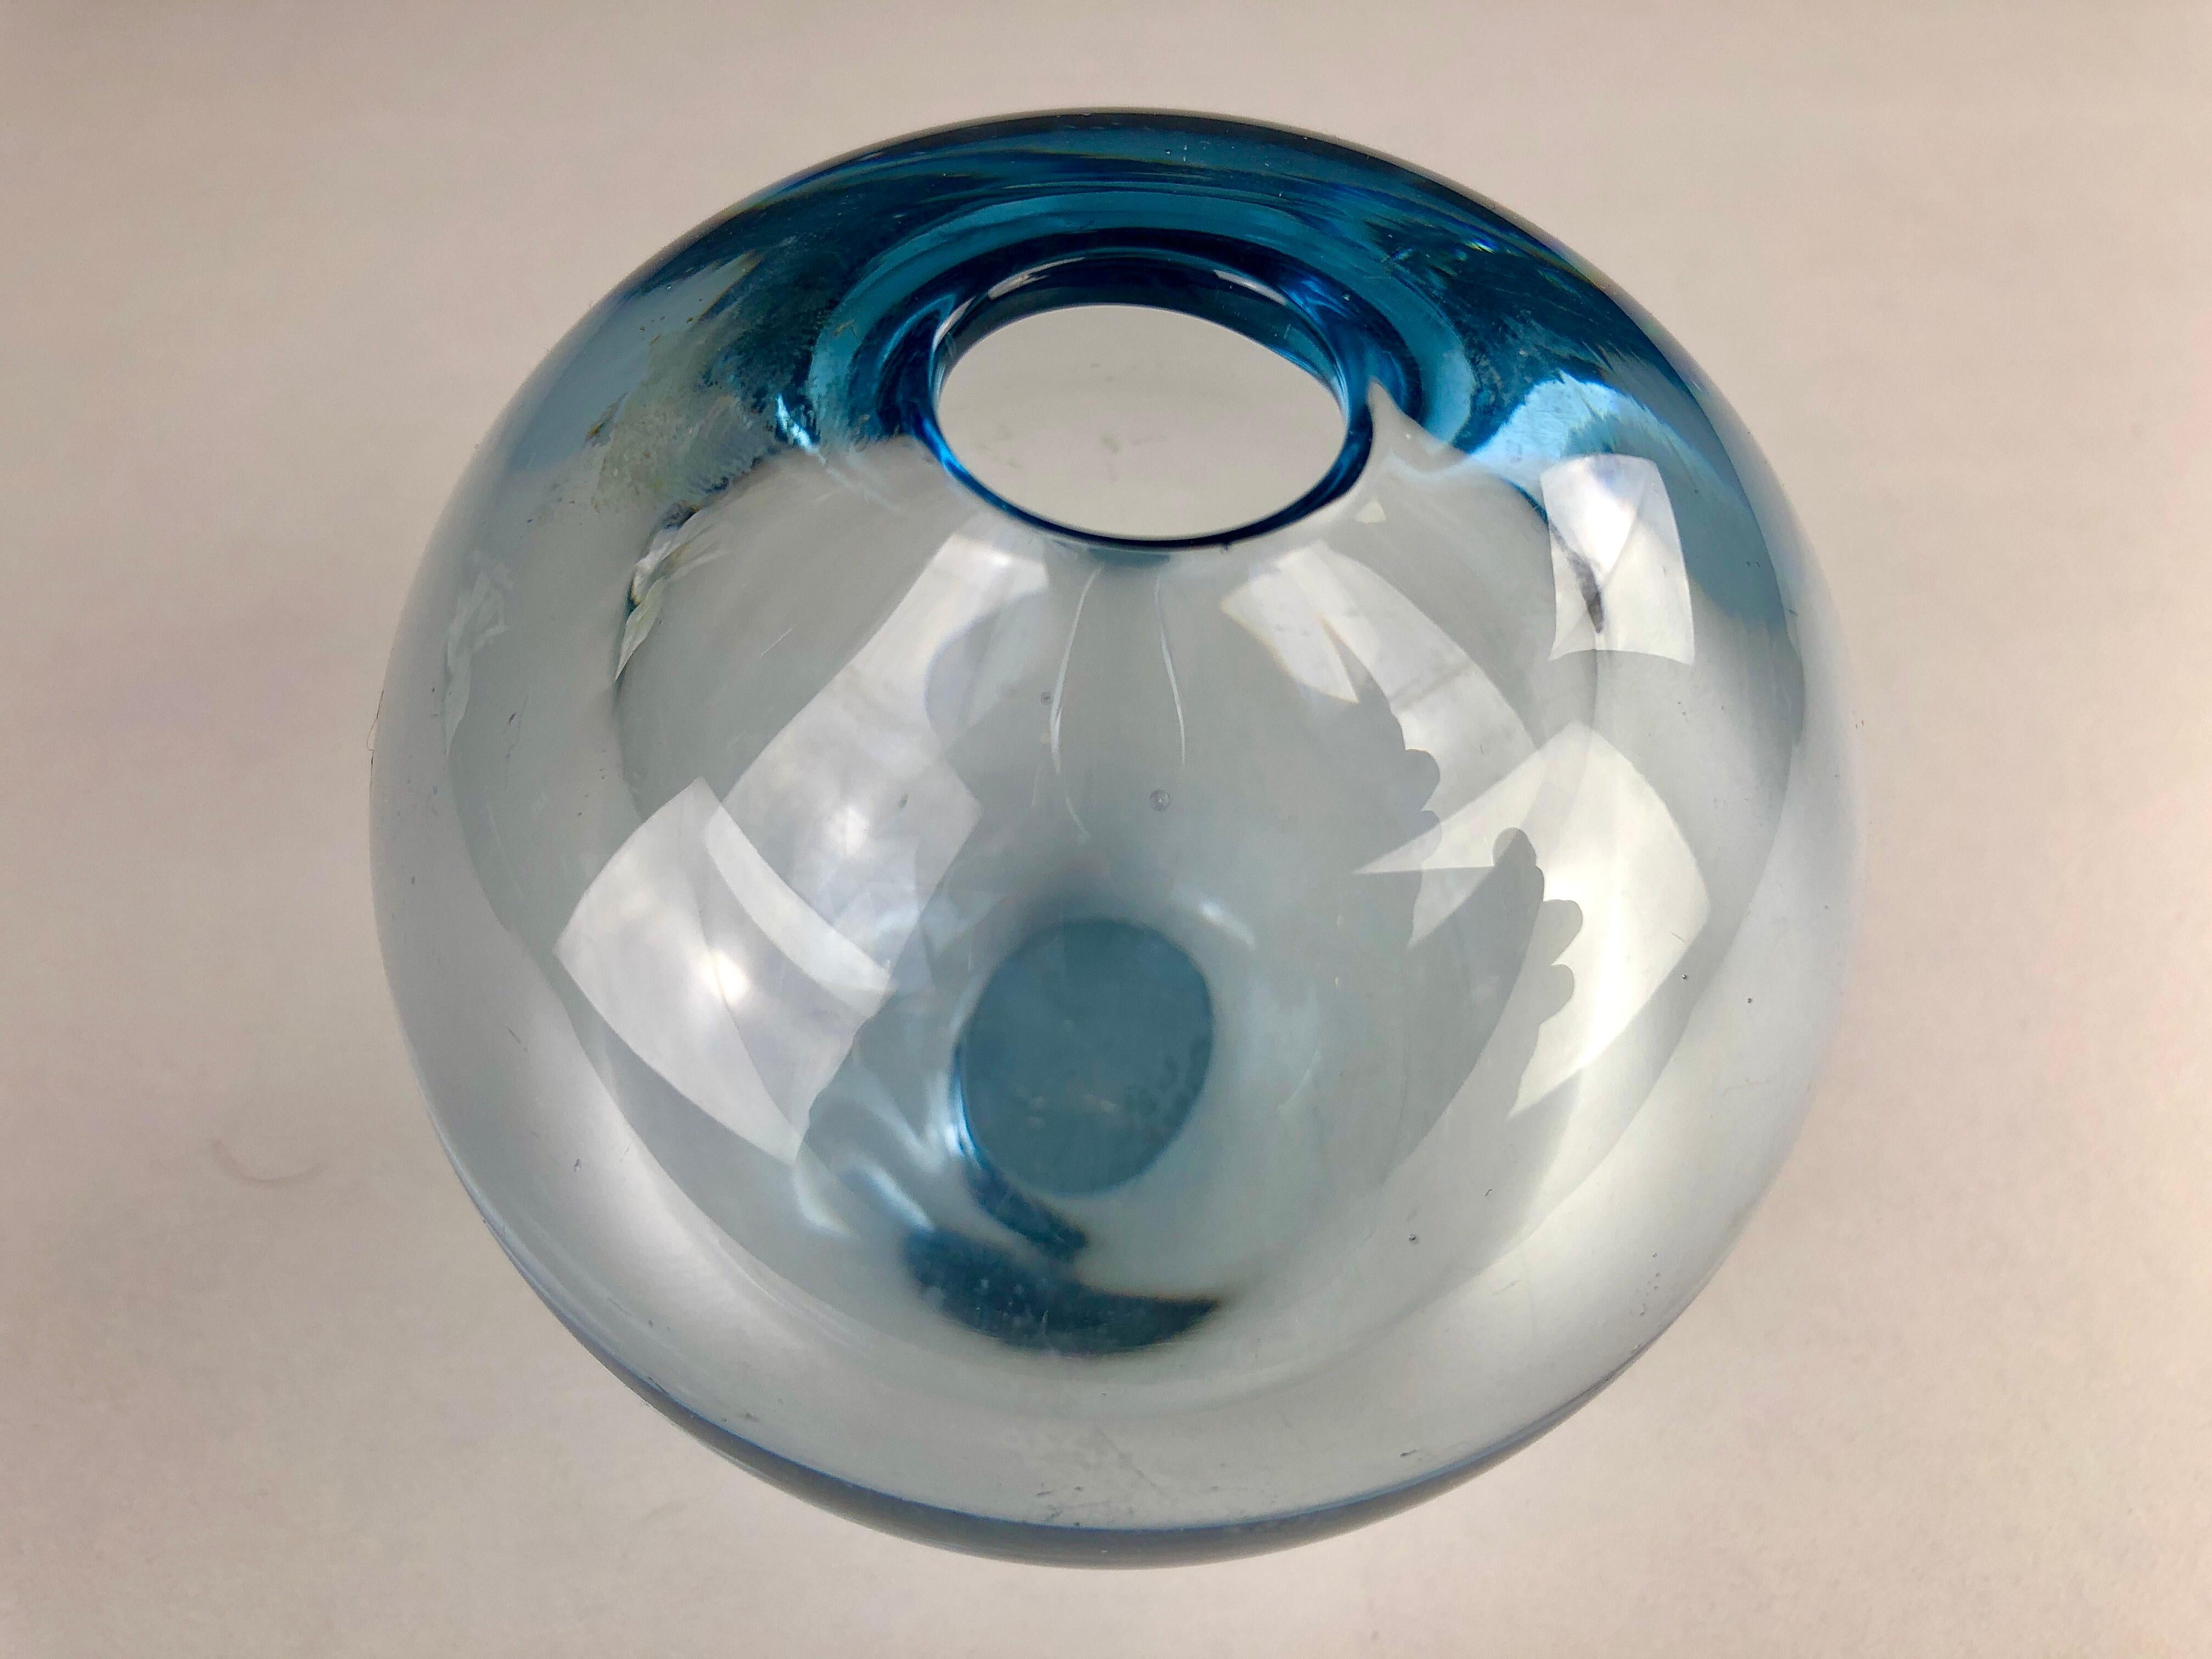 1950´s Danish handblown glass drop vase by Per Lütken for Holmegaard with engraved signature and year of production 1958 

Danish glassmaker Per Lütken (1916 - 1998) worked at Holmegaard from 1942 until his death in 1998. During this period he